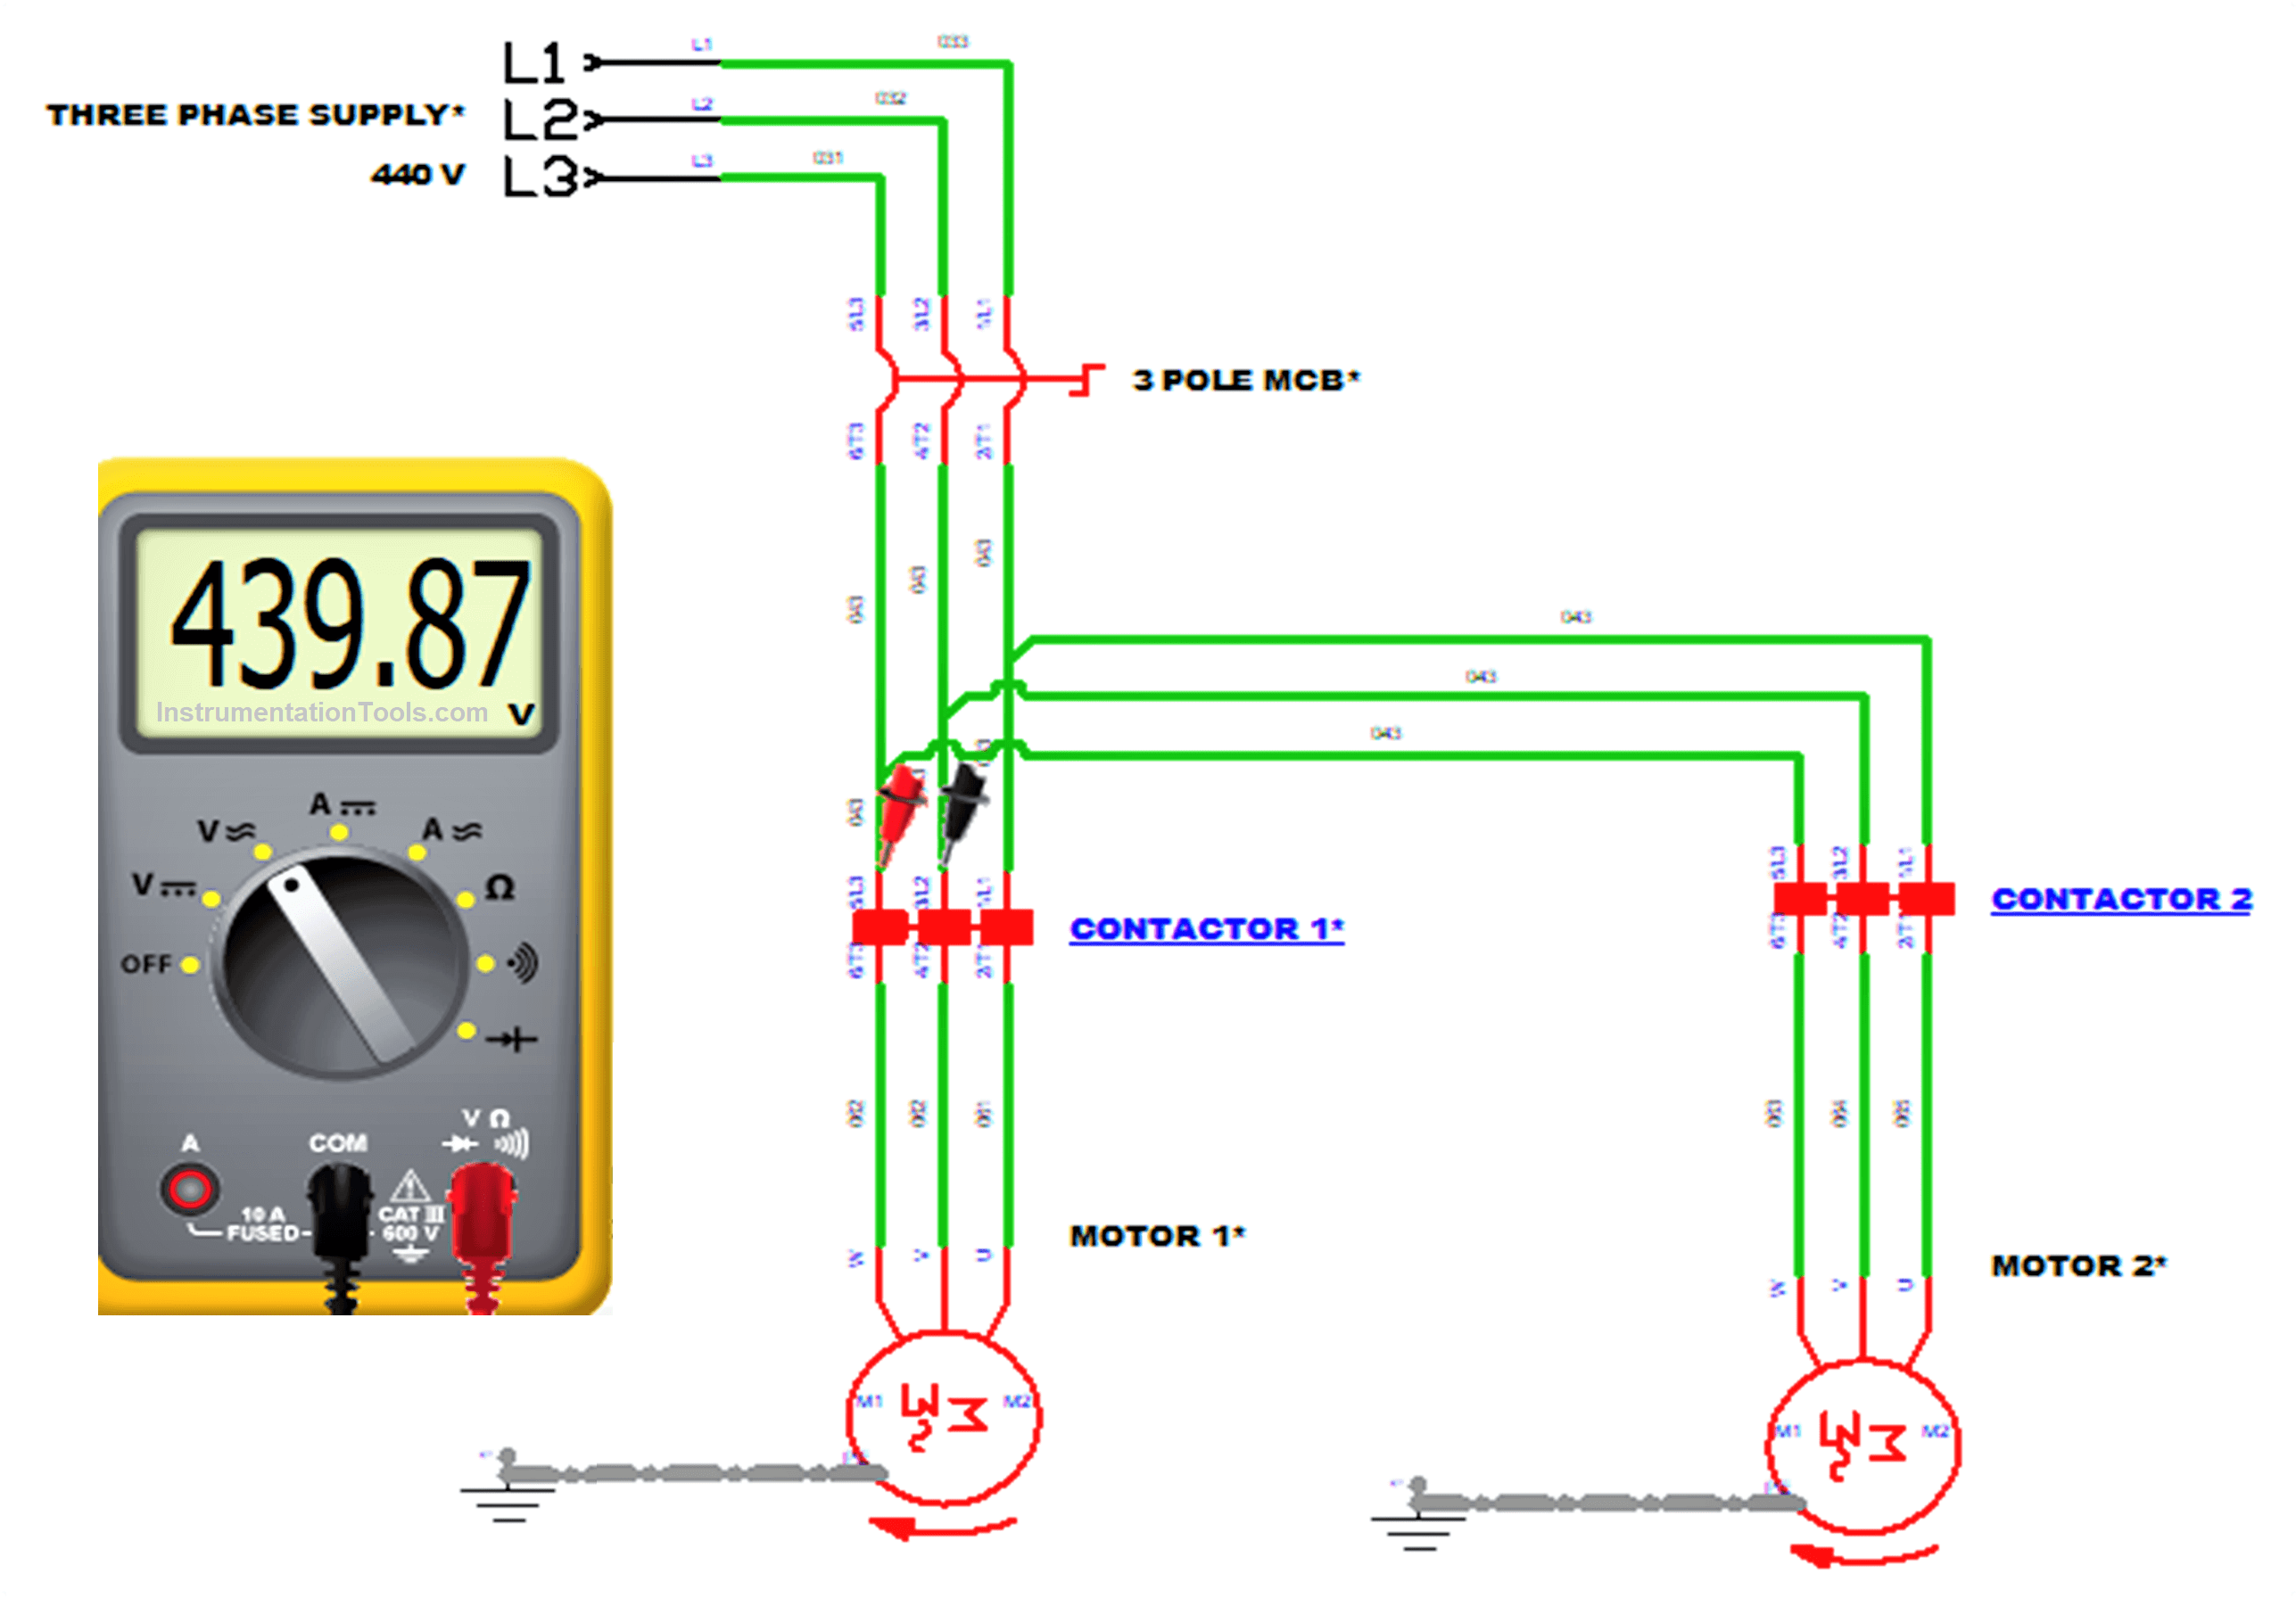 Control Two Motors In Sequence After